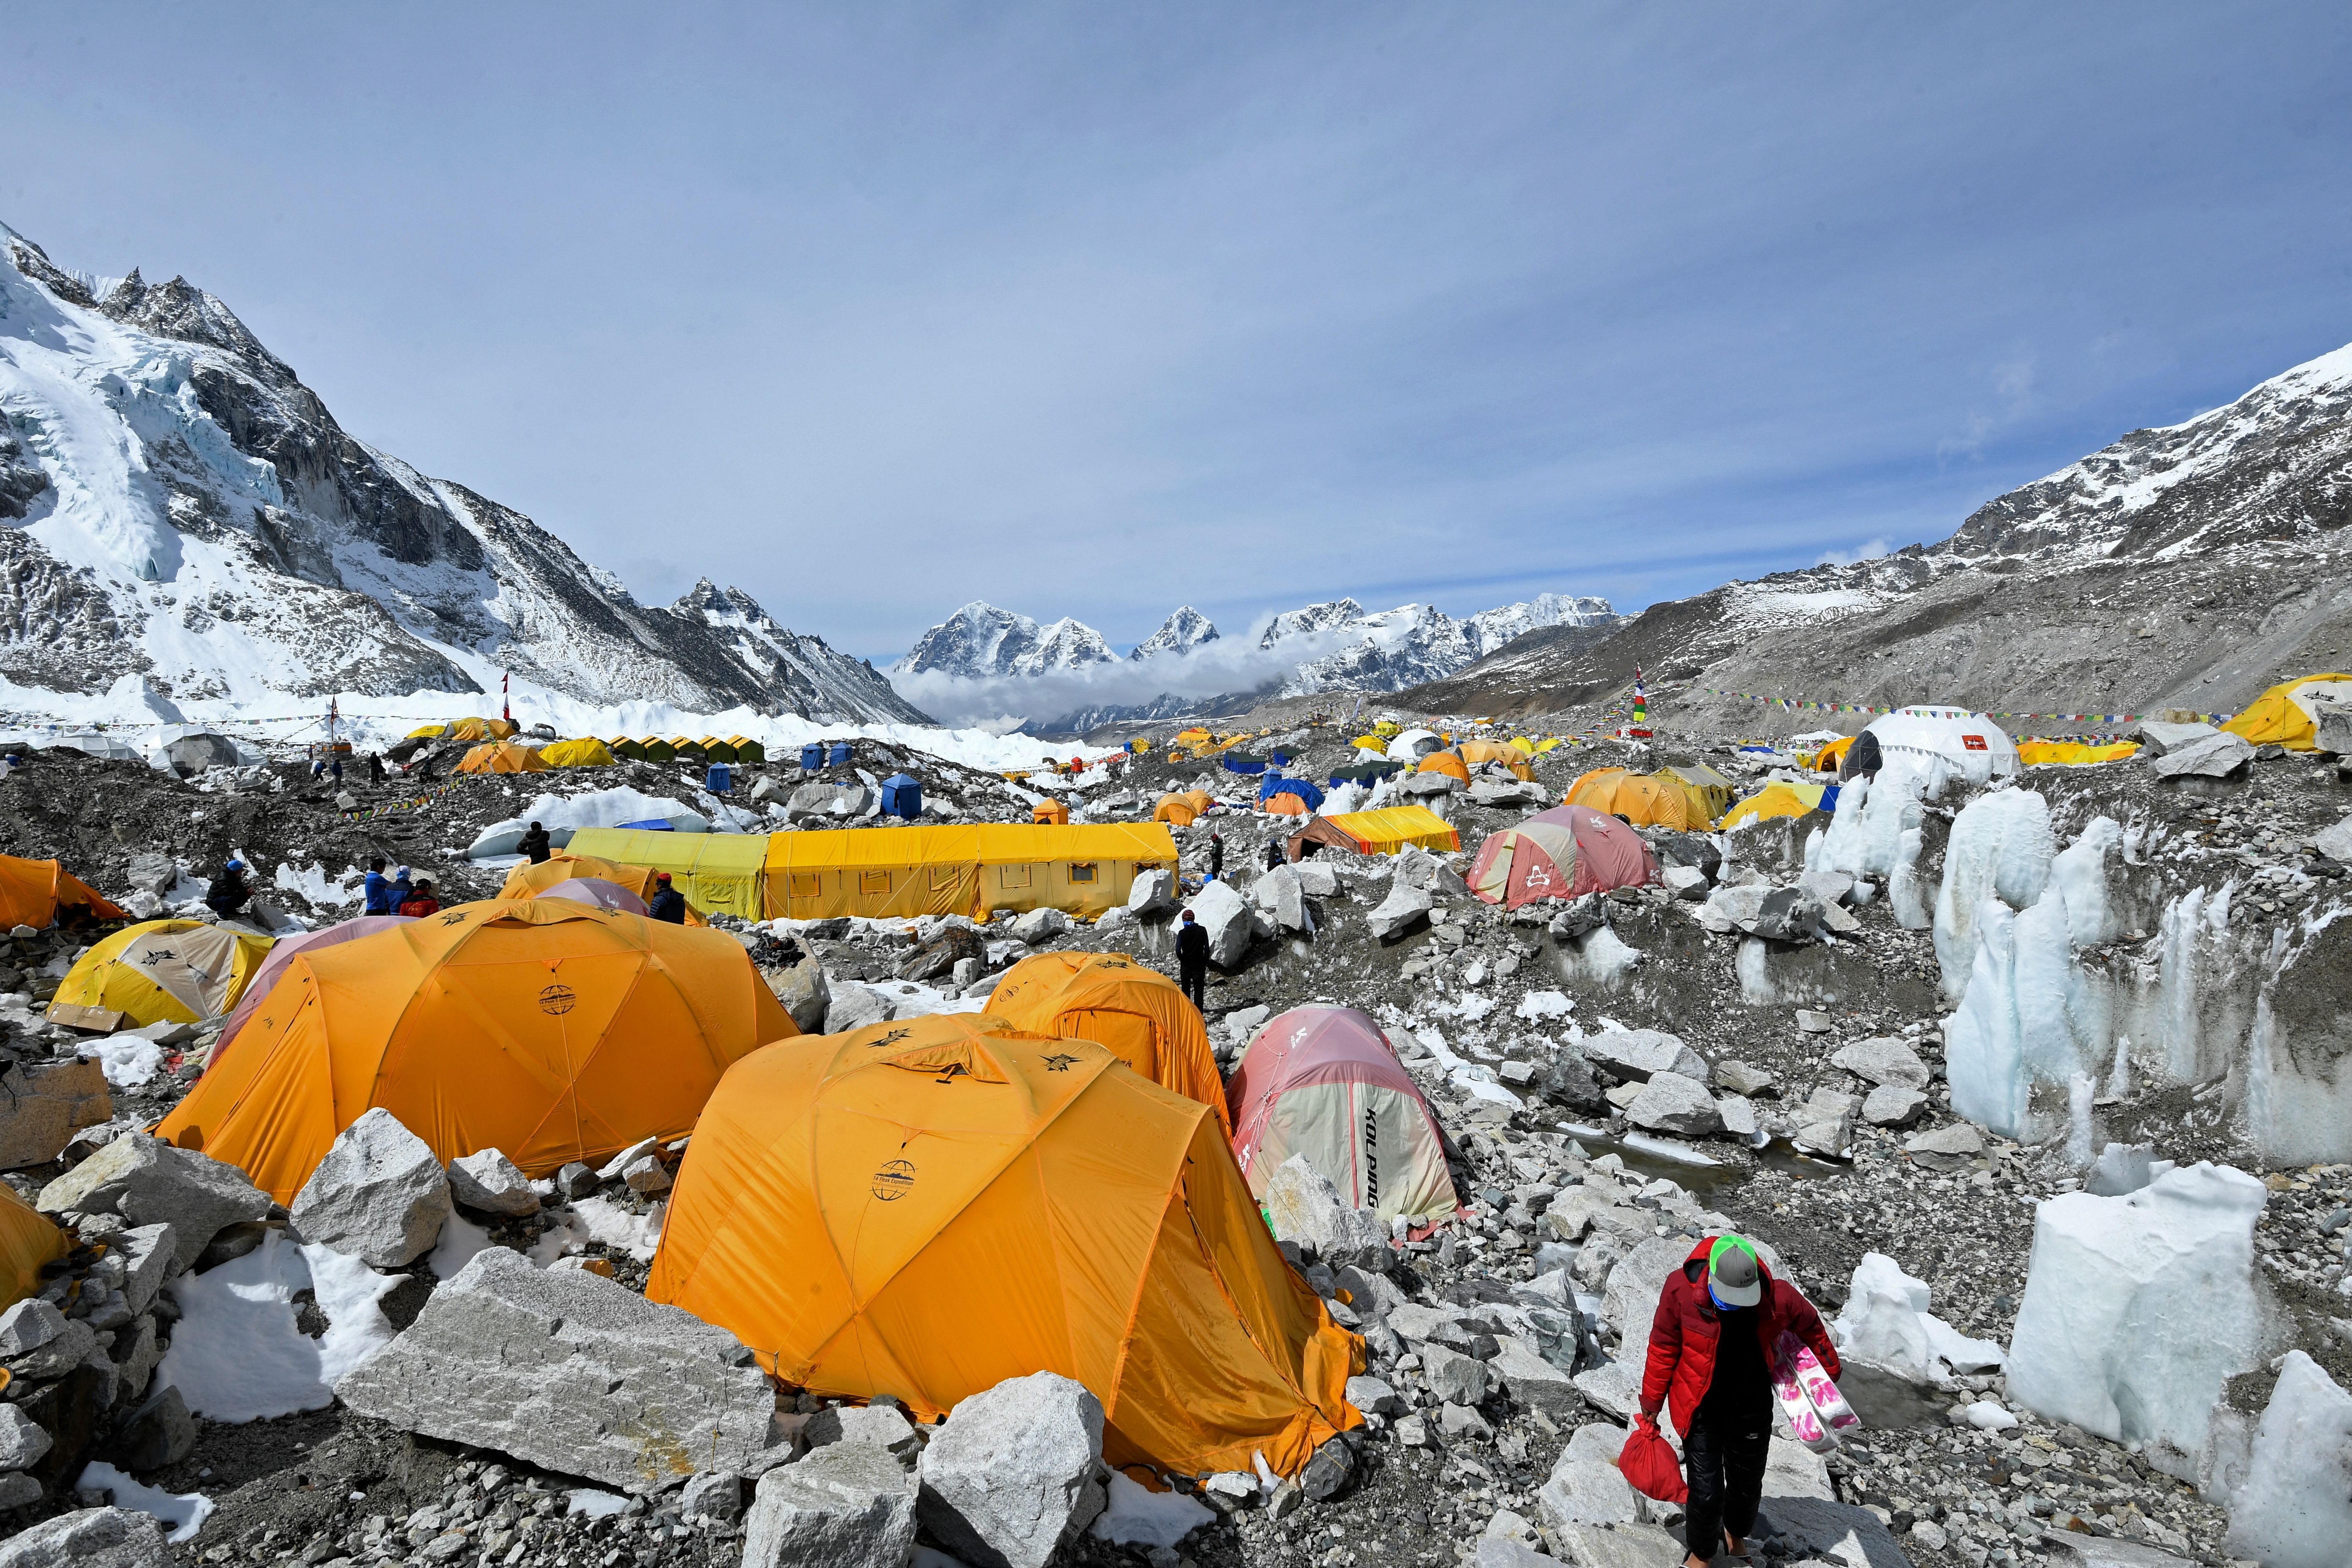 Tents belonging to mountaineers at the Everest base camp in the Mount Everest region of Solukhumbu district on 3 May 2021